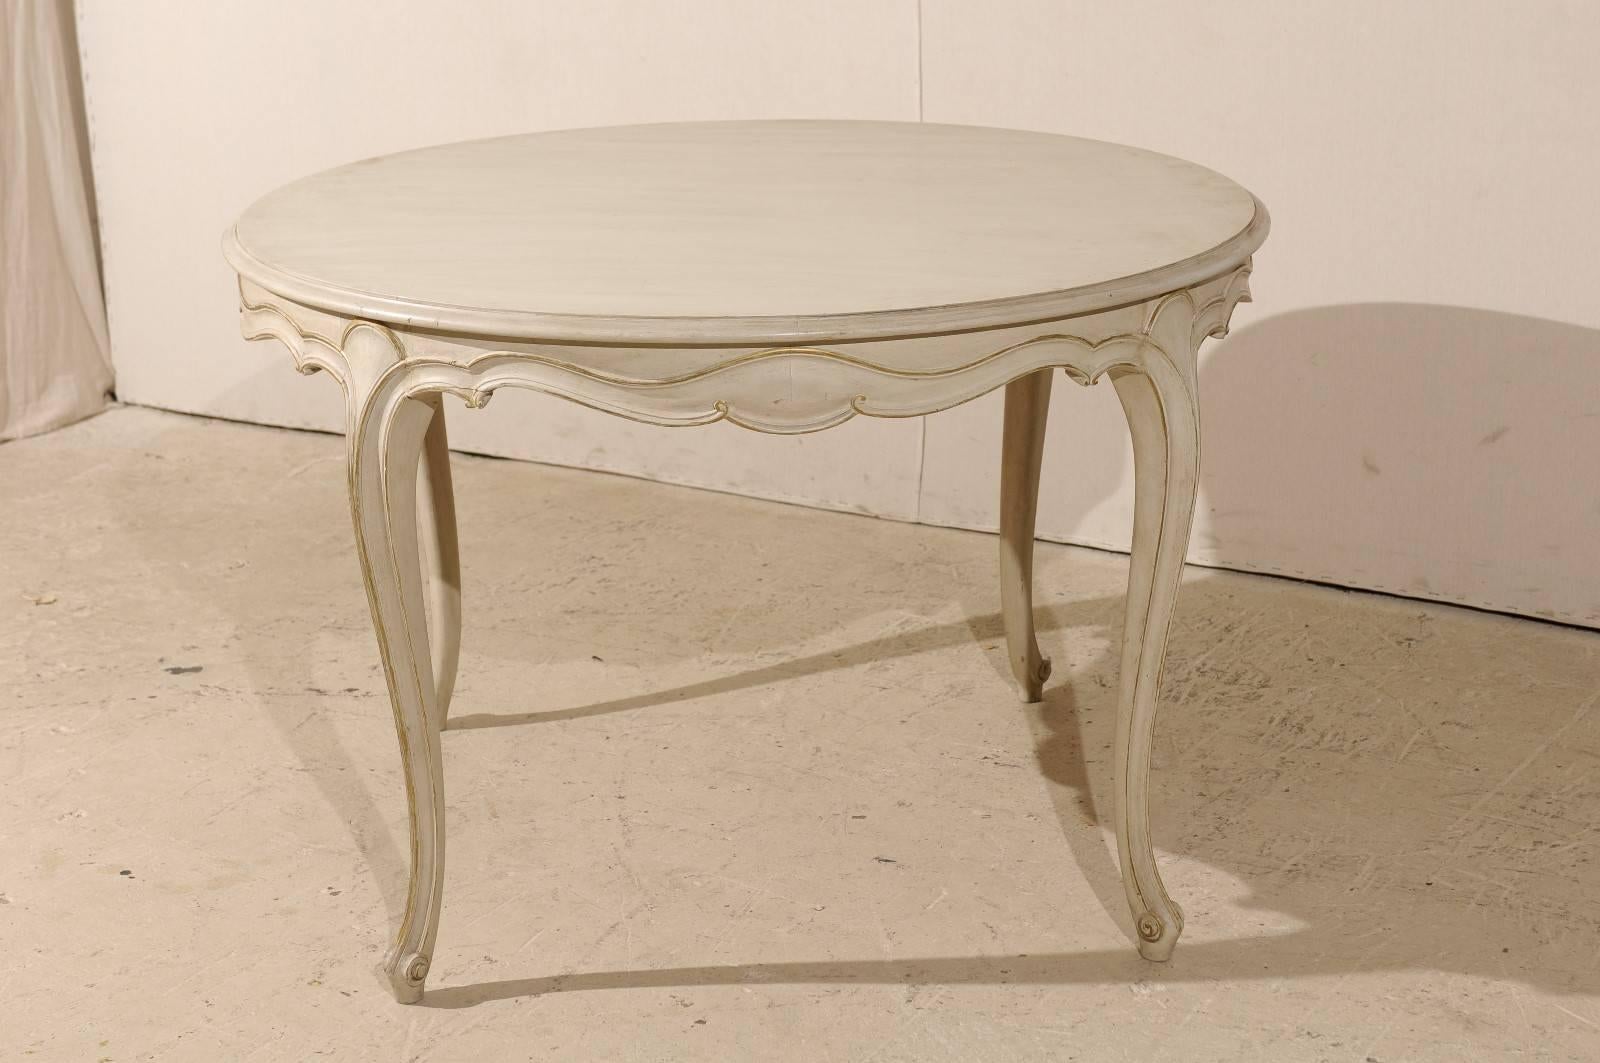 Carved French Louis XV Wood Round Top Centre Table, Neutral Beige with Gilded Accents